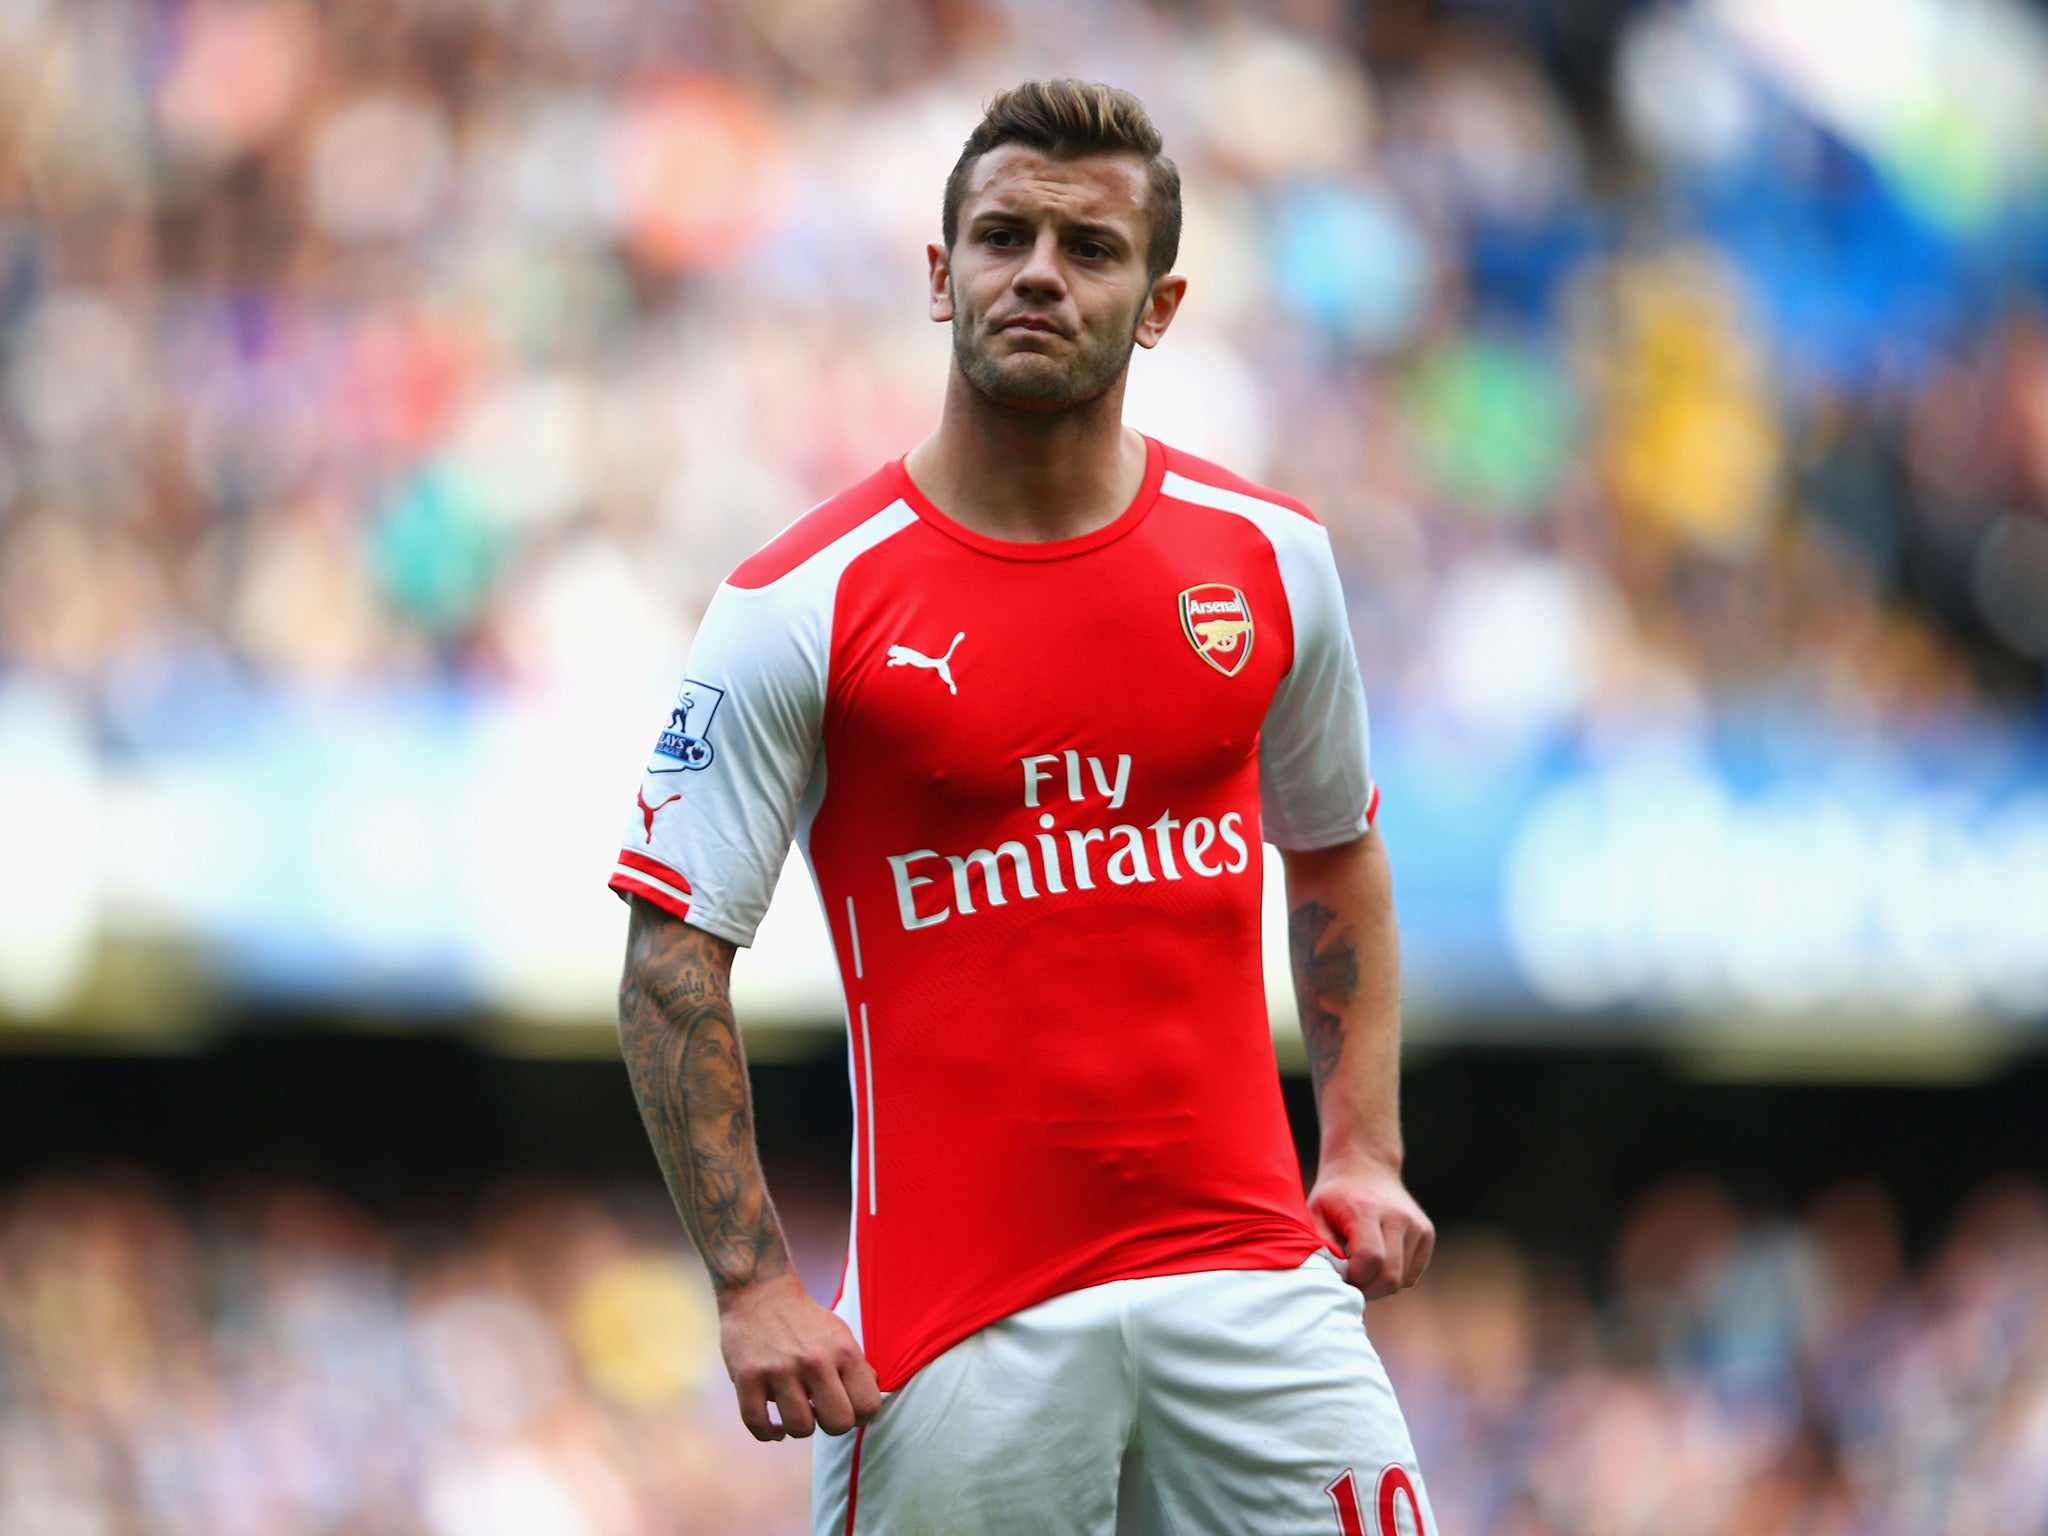 Arsenal have no intention of selling Jack Wilshere, according to Arsene Wenger